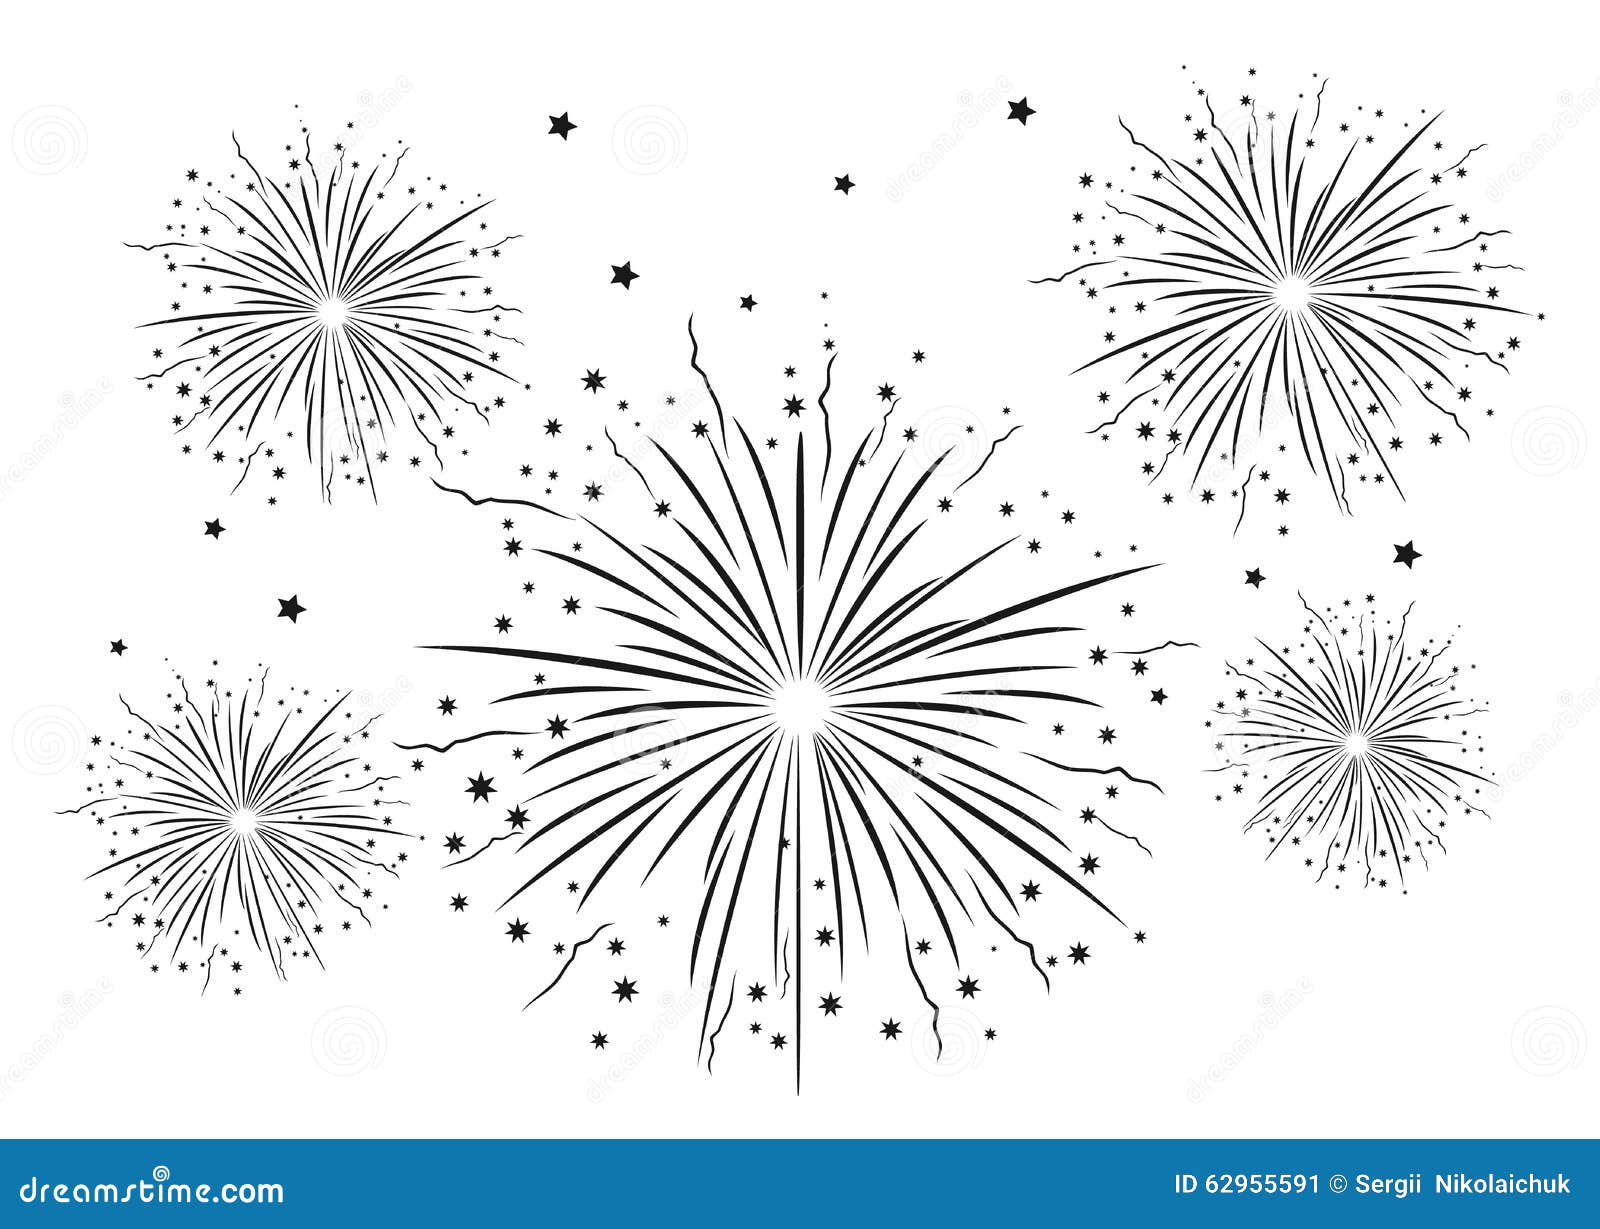 free black and white fireworks clipart - photo #23